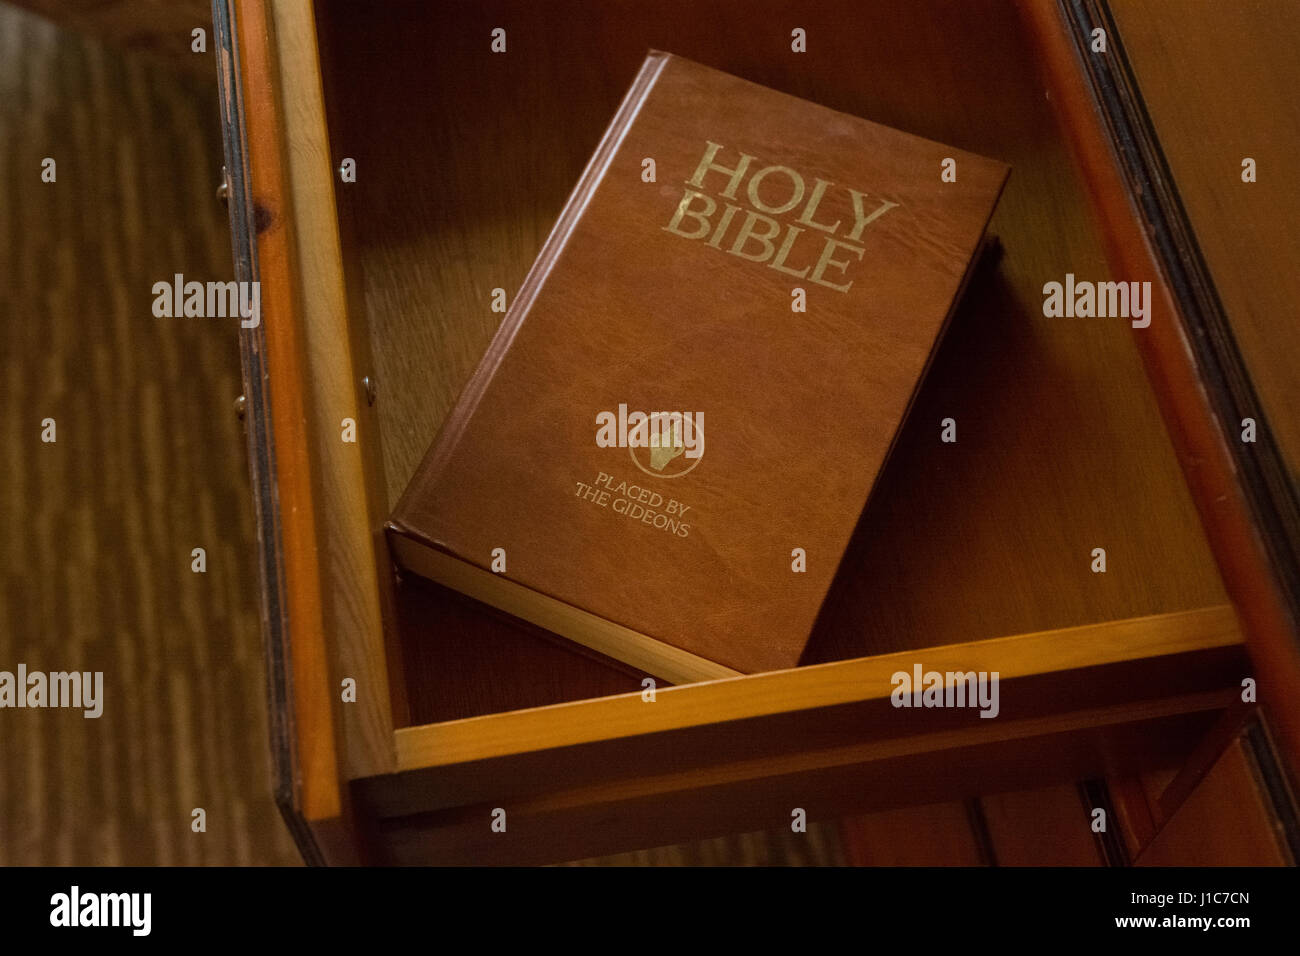 Gideons bible in hotel room bedside drawer Stock Photo